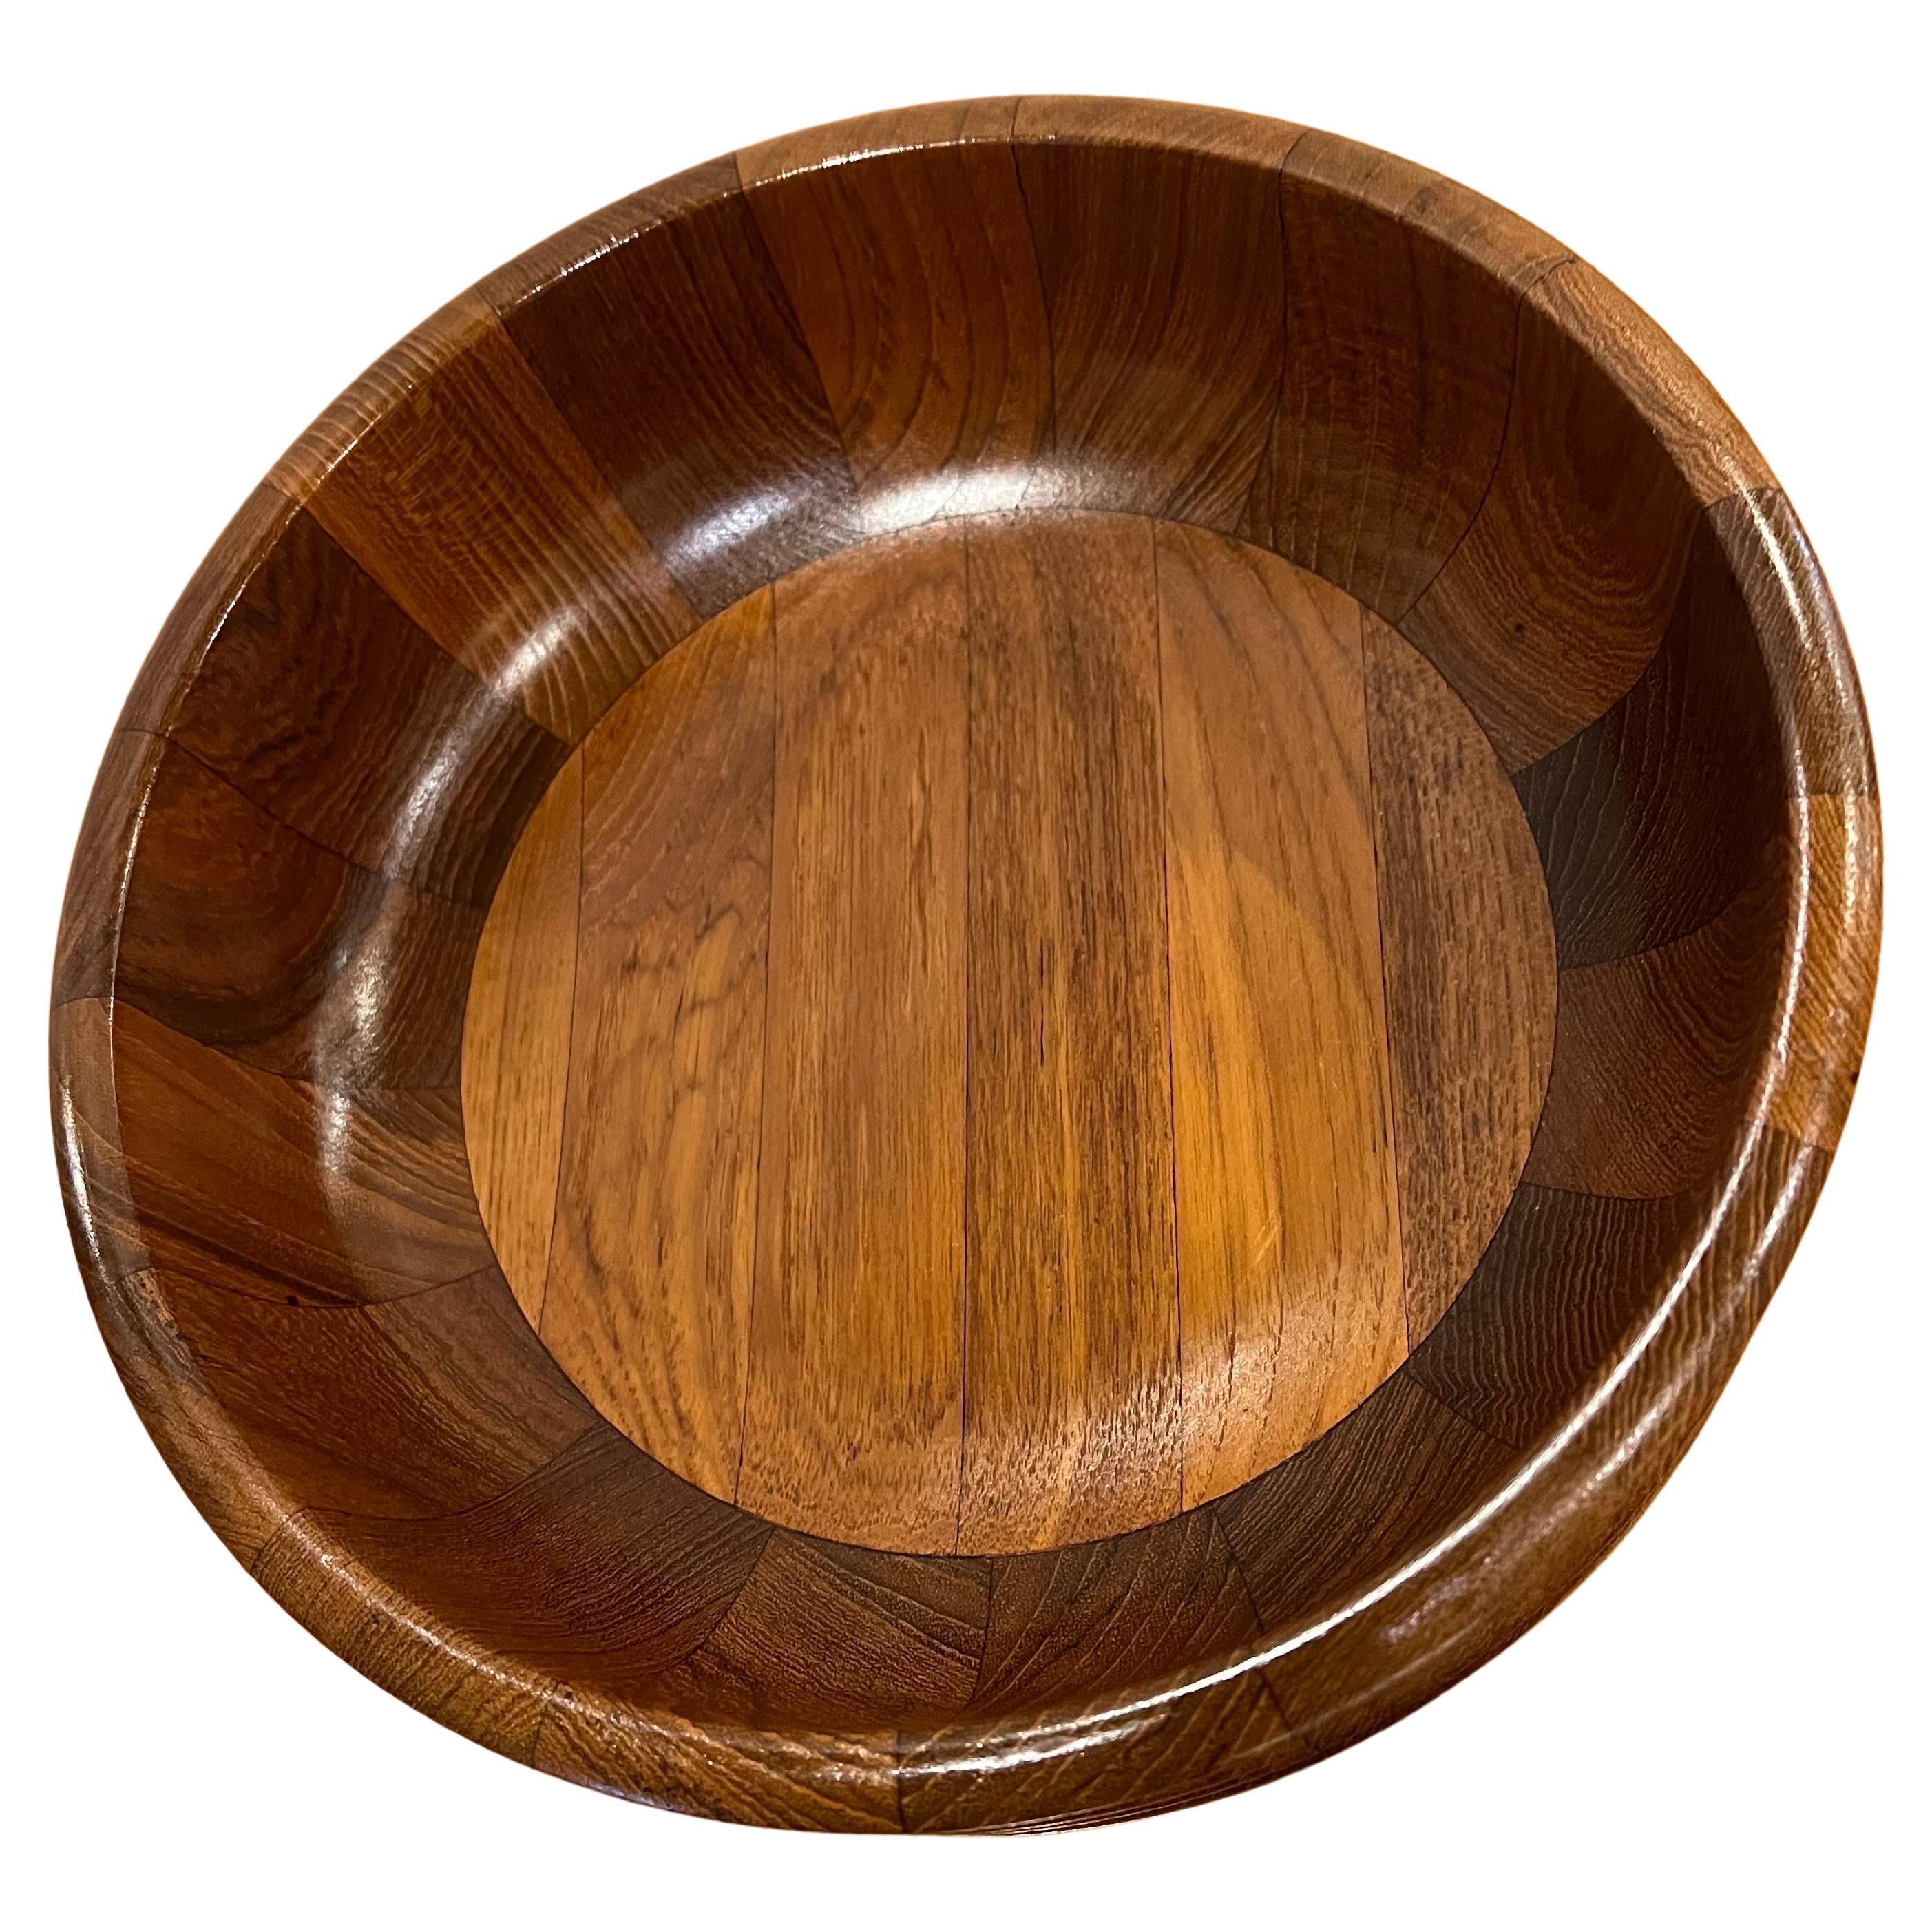 Danish Modern solid Teak Bowl With Lid By Mandalay Genuine Teak In Good Condition For Sale In San Diego, CA